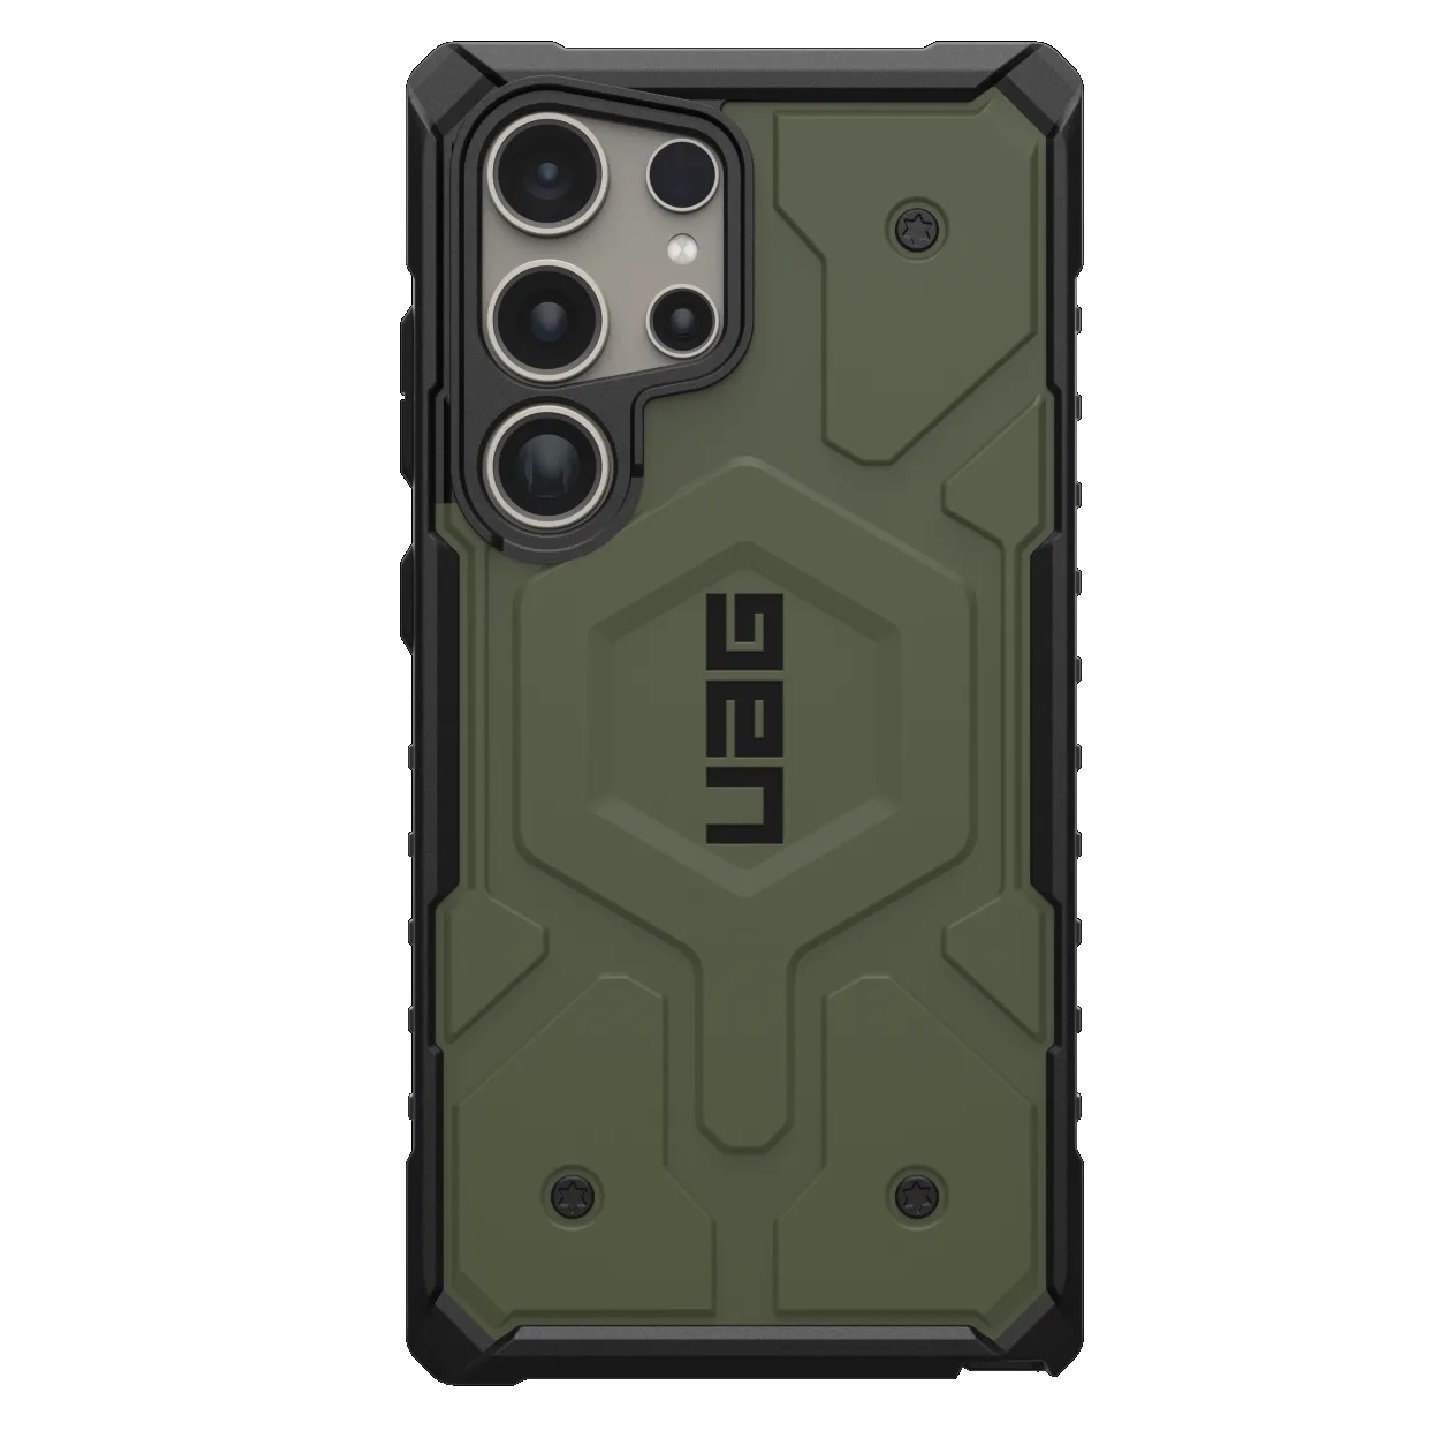 Uag Pathfinder Samsung Galaxy S24 Ultra 5G (6.8') Case - Olive Drab (214425117272), 18 FT. Drop Protection (5.4M), Armor Shell, Protective Screen